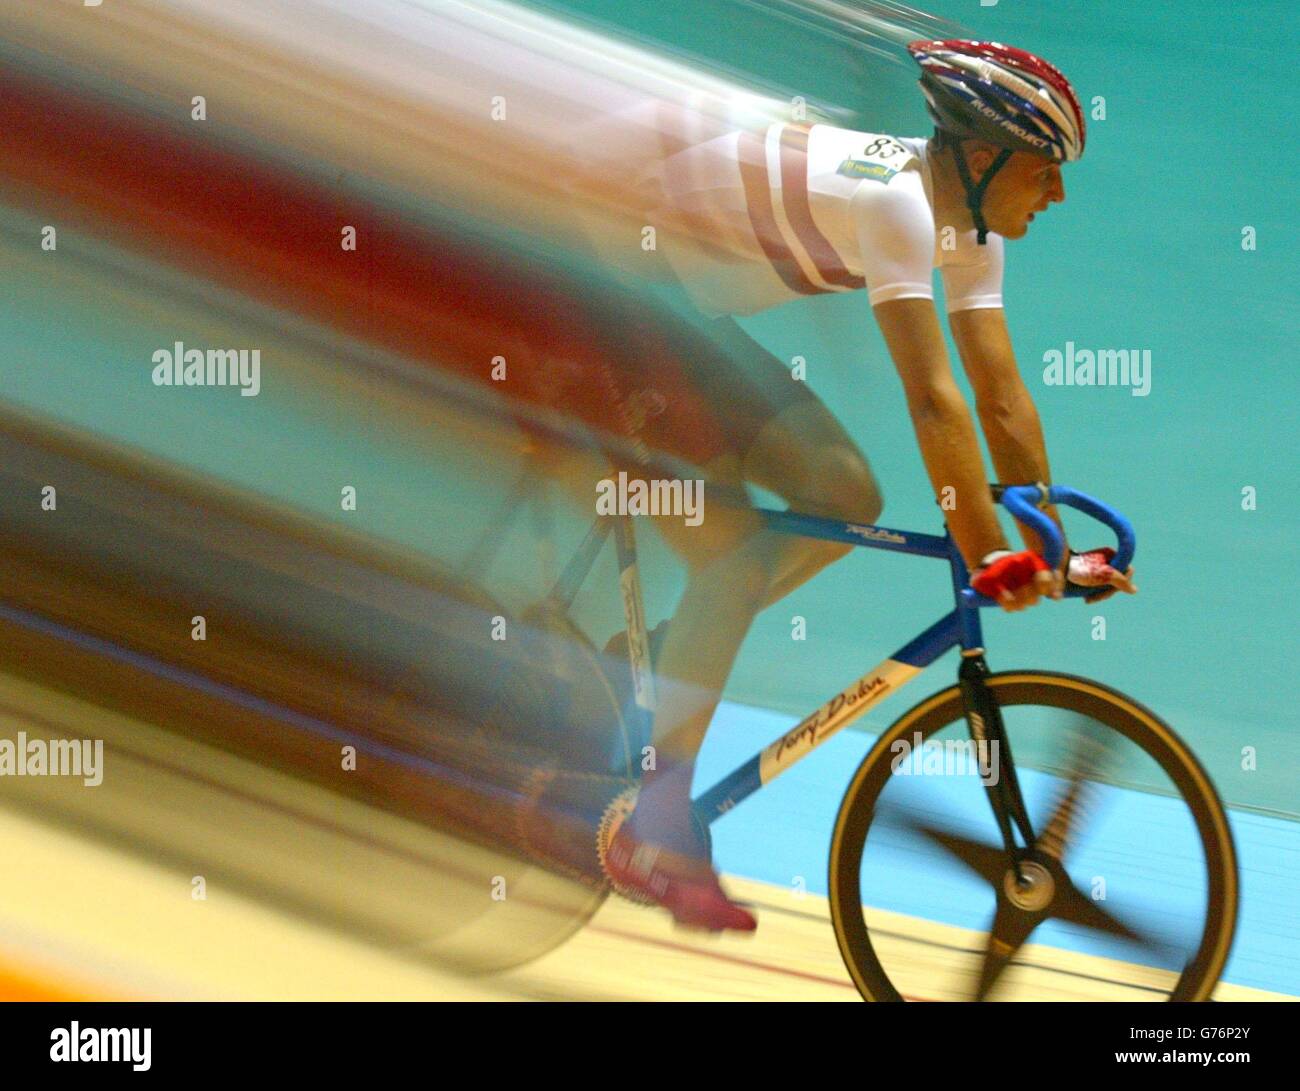 England's Steve Cummings during the men's 20 km scratch race at the Commonwealth Games in Manchester. Stock Photo